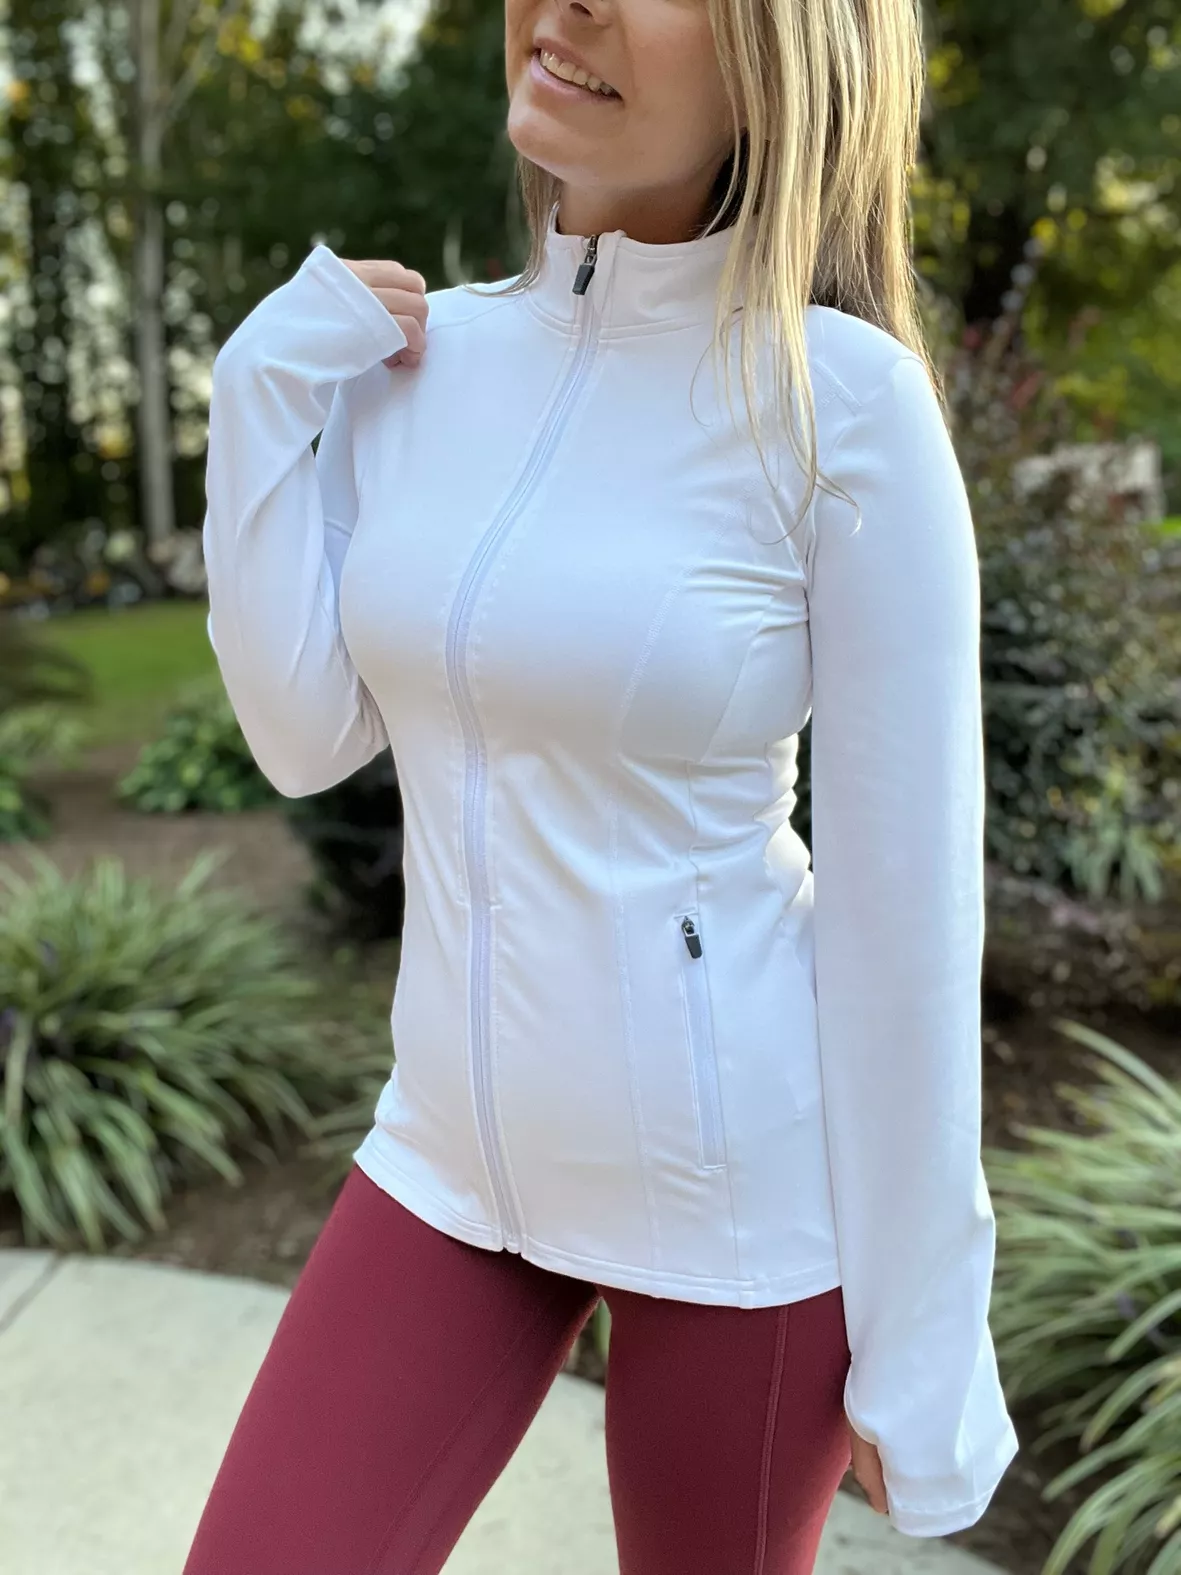 Buy Pinspark Workout Jacket for Women Full Zip Long Sleeve Yoga Athletic  Running Active Sportswear with Thumb Holes at